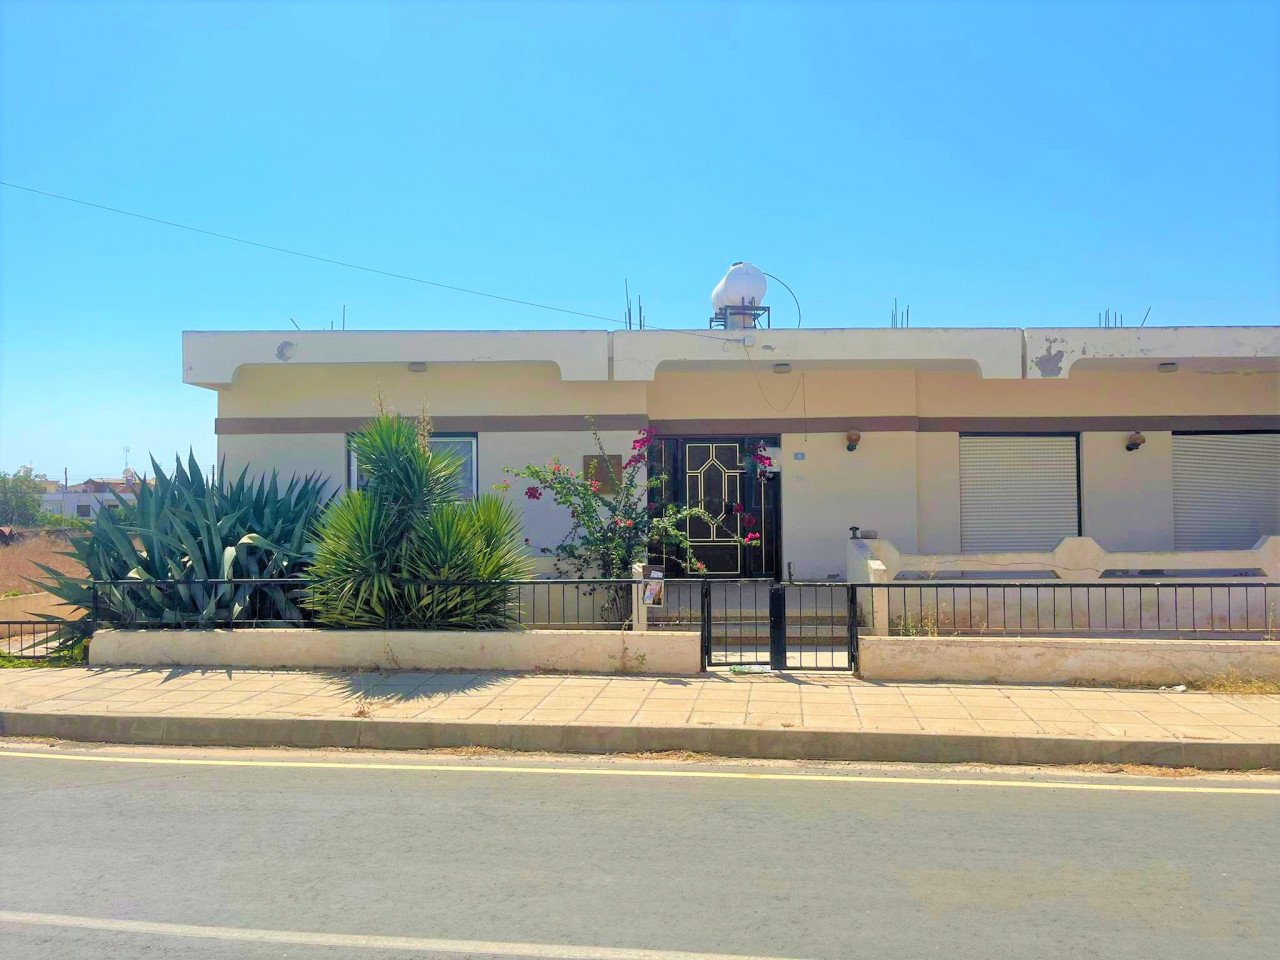 Property for Sale: House (Detached) in Avgorou, Famagusta  | Key Realtor Cyprus